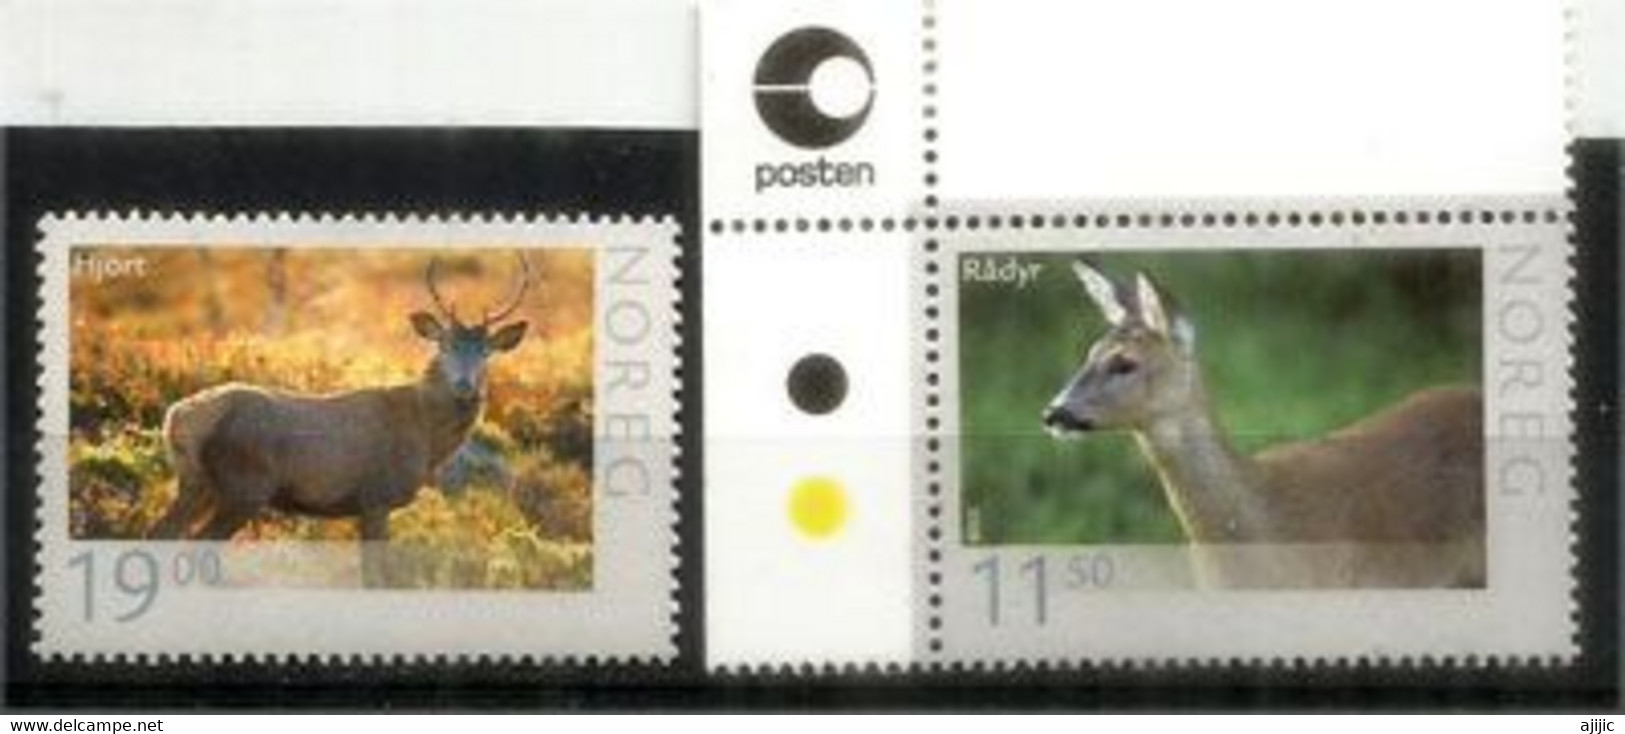 NORVÈGE. Faune Sauvage De Norvège (cerf Elaphe). 2 Timbres Neuf ** - Unused Stamps